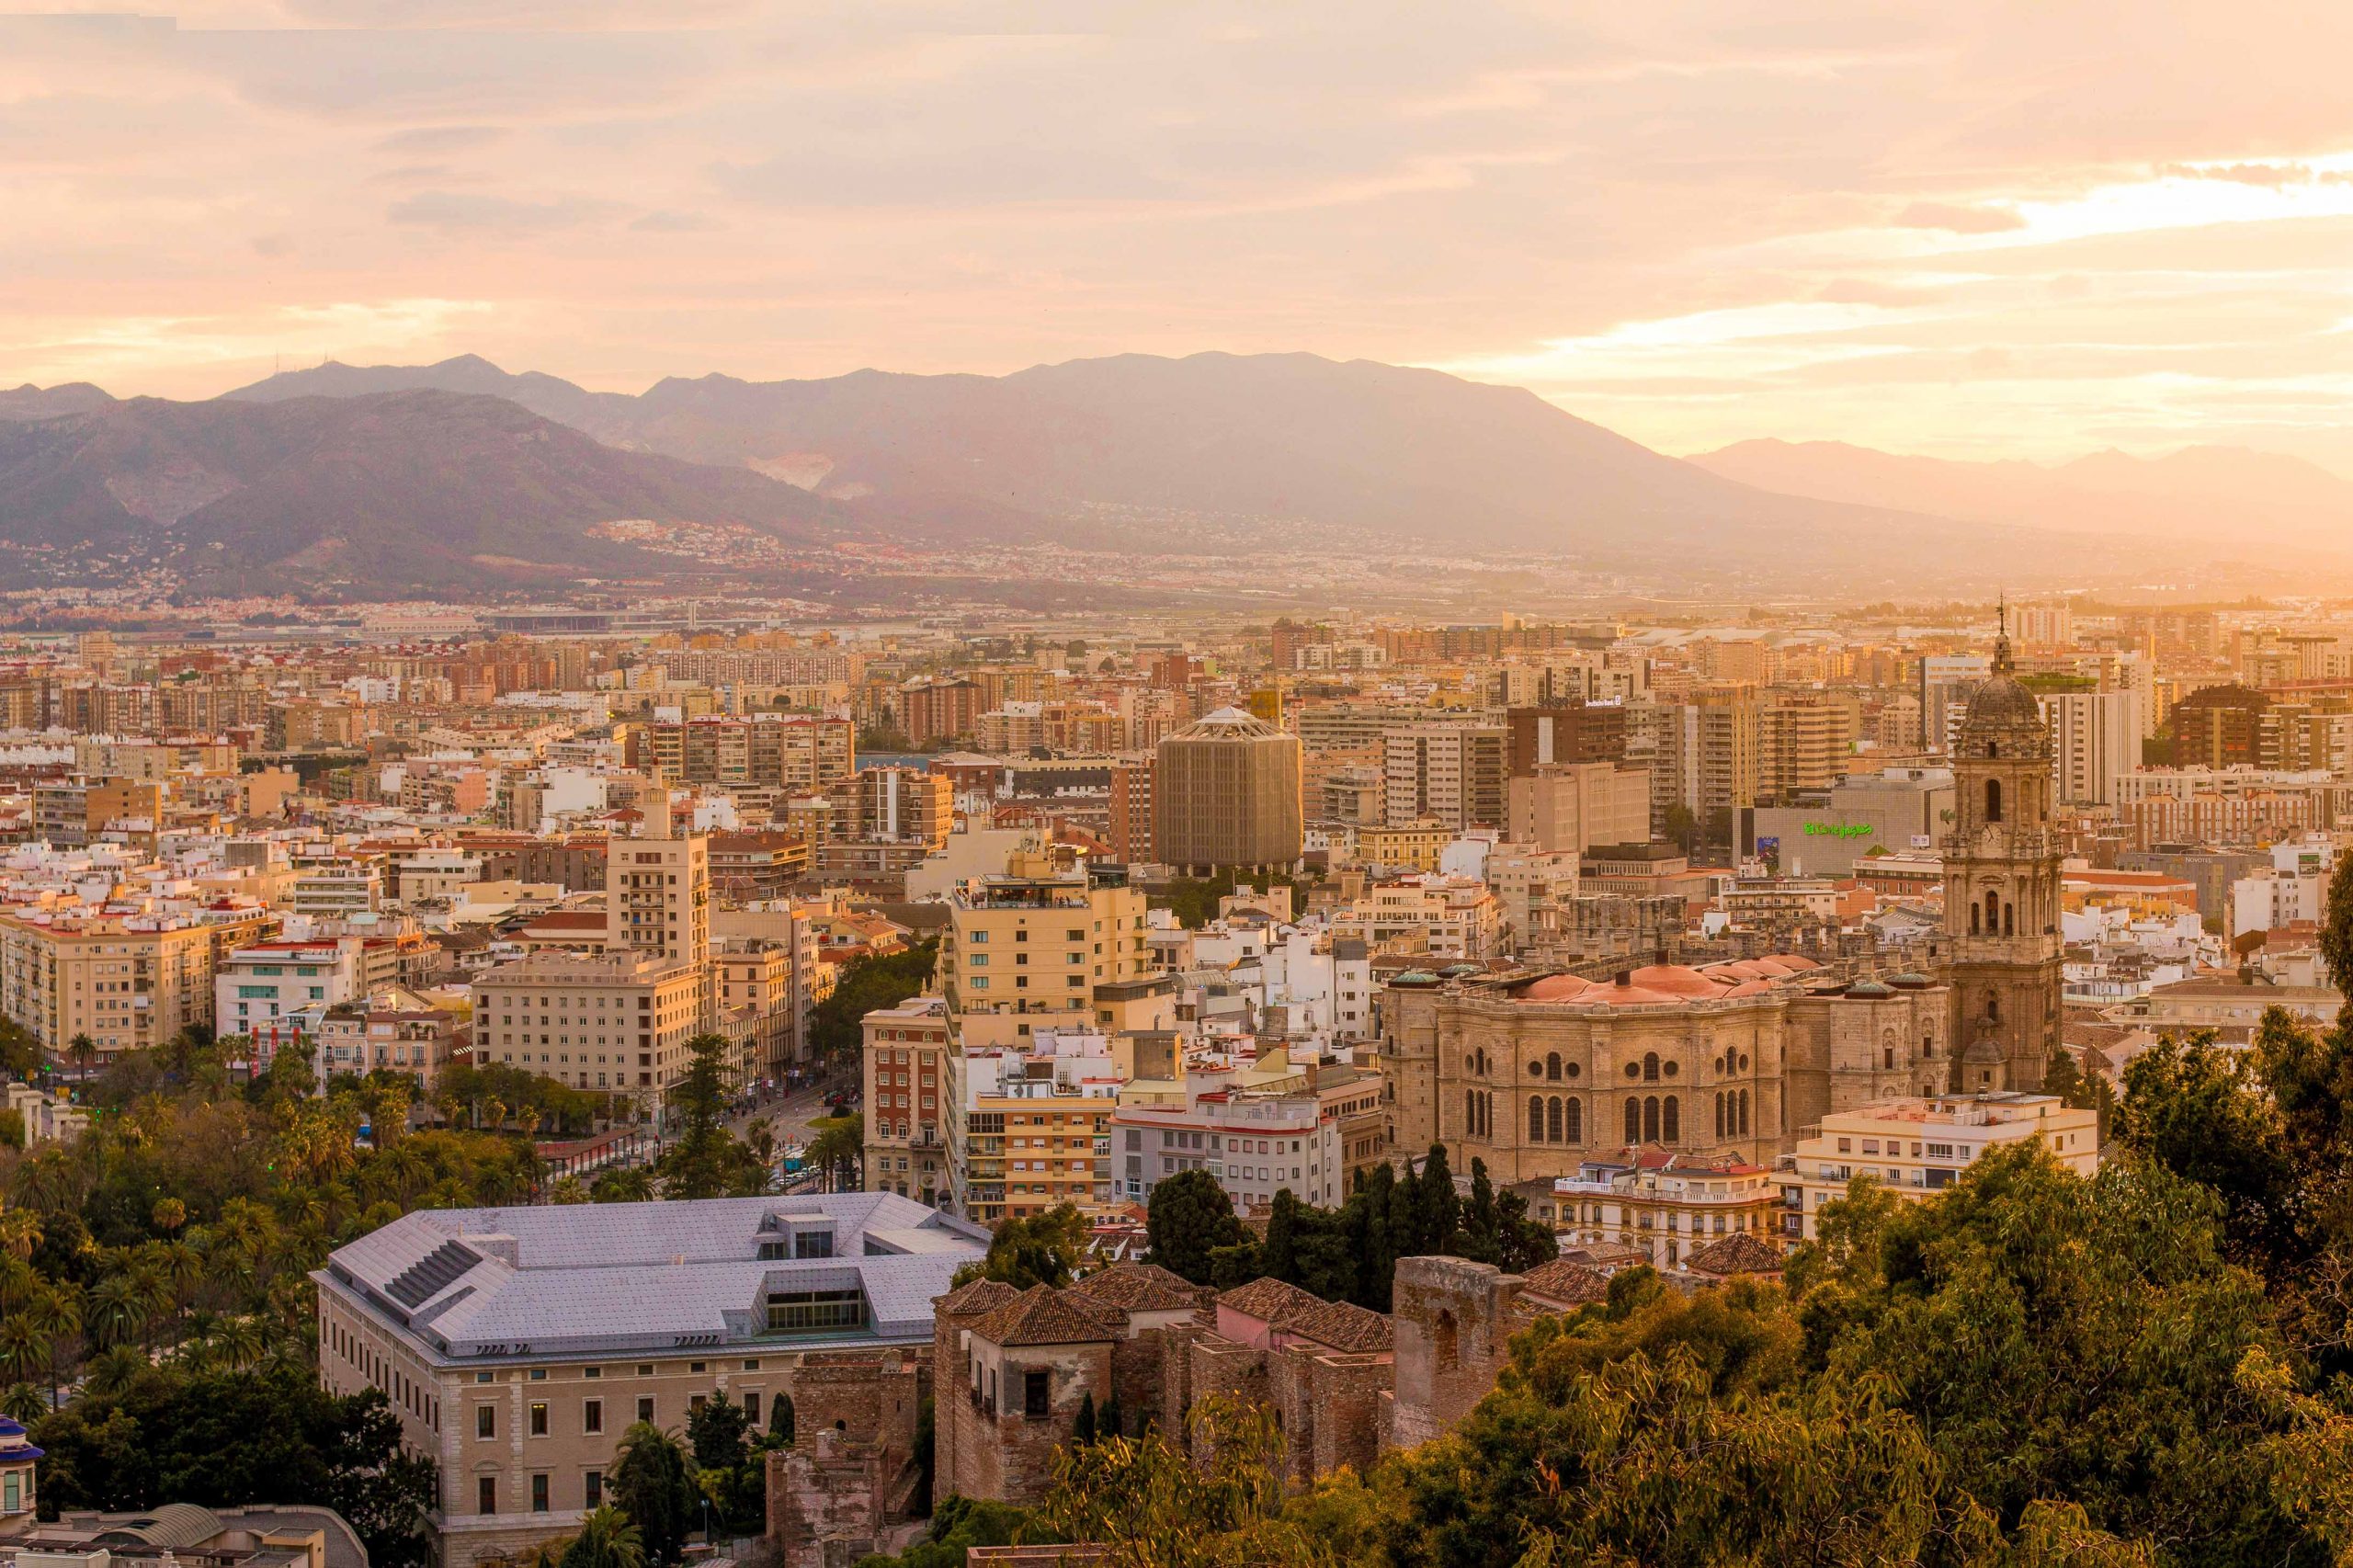 The city centre of Malaga, Costa del Sol, Andalucia at sunset |